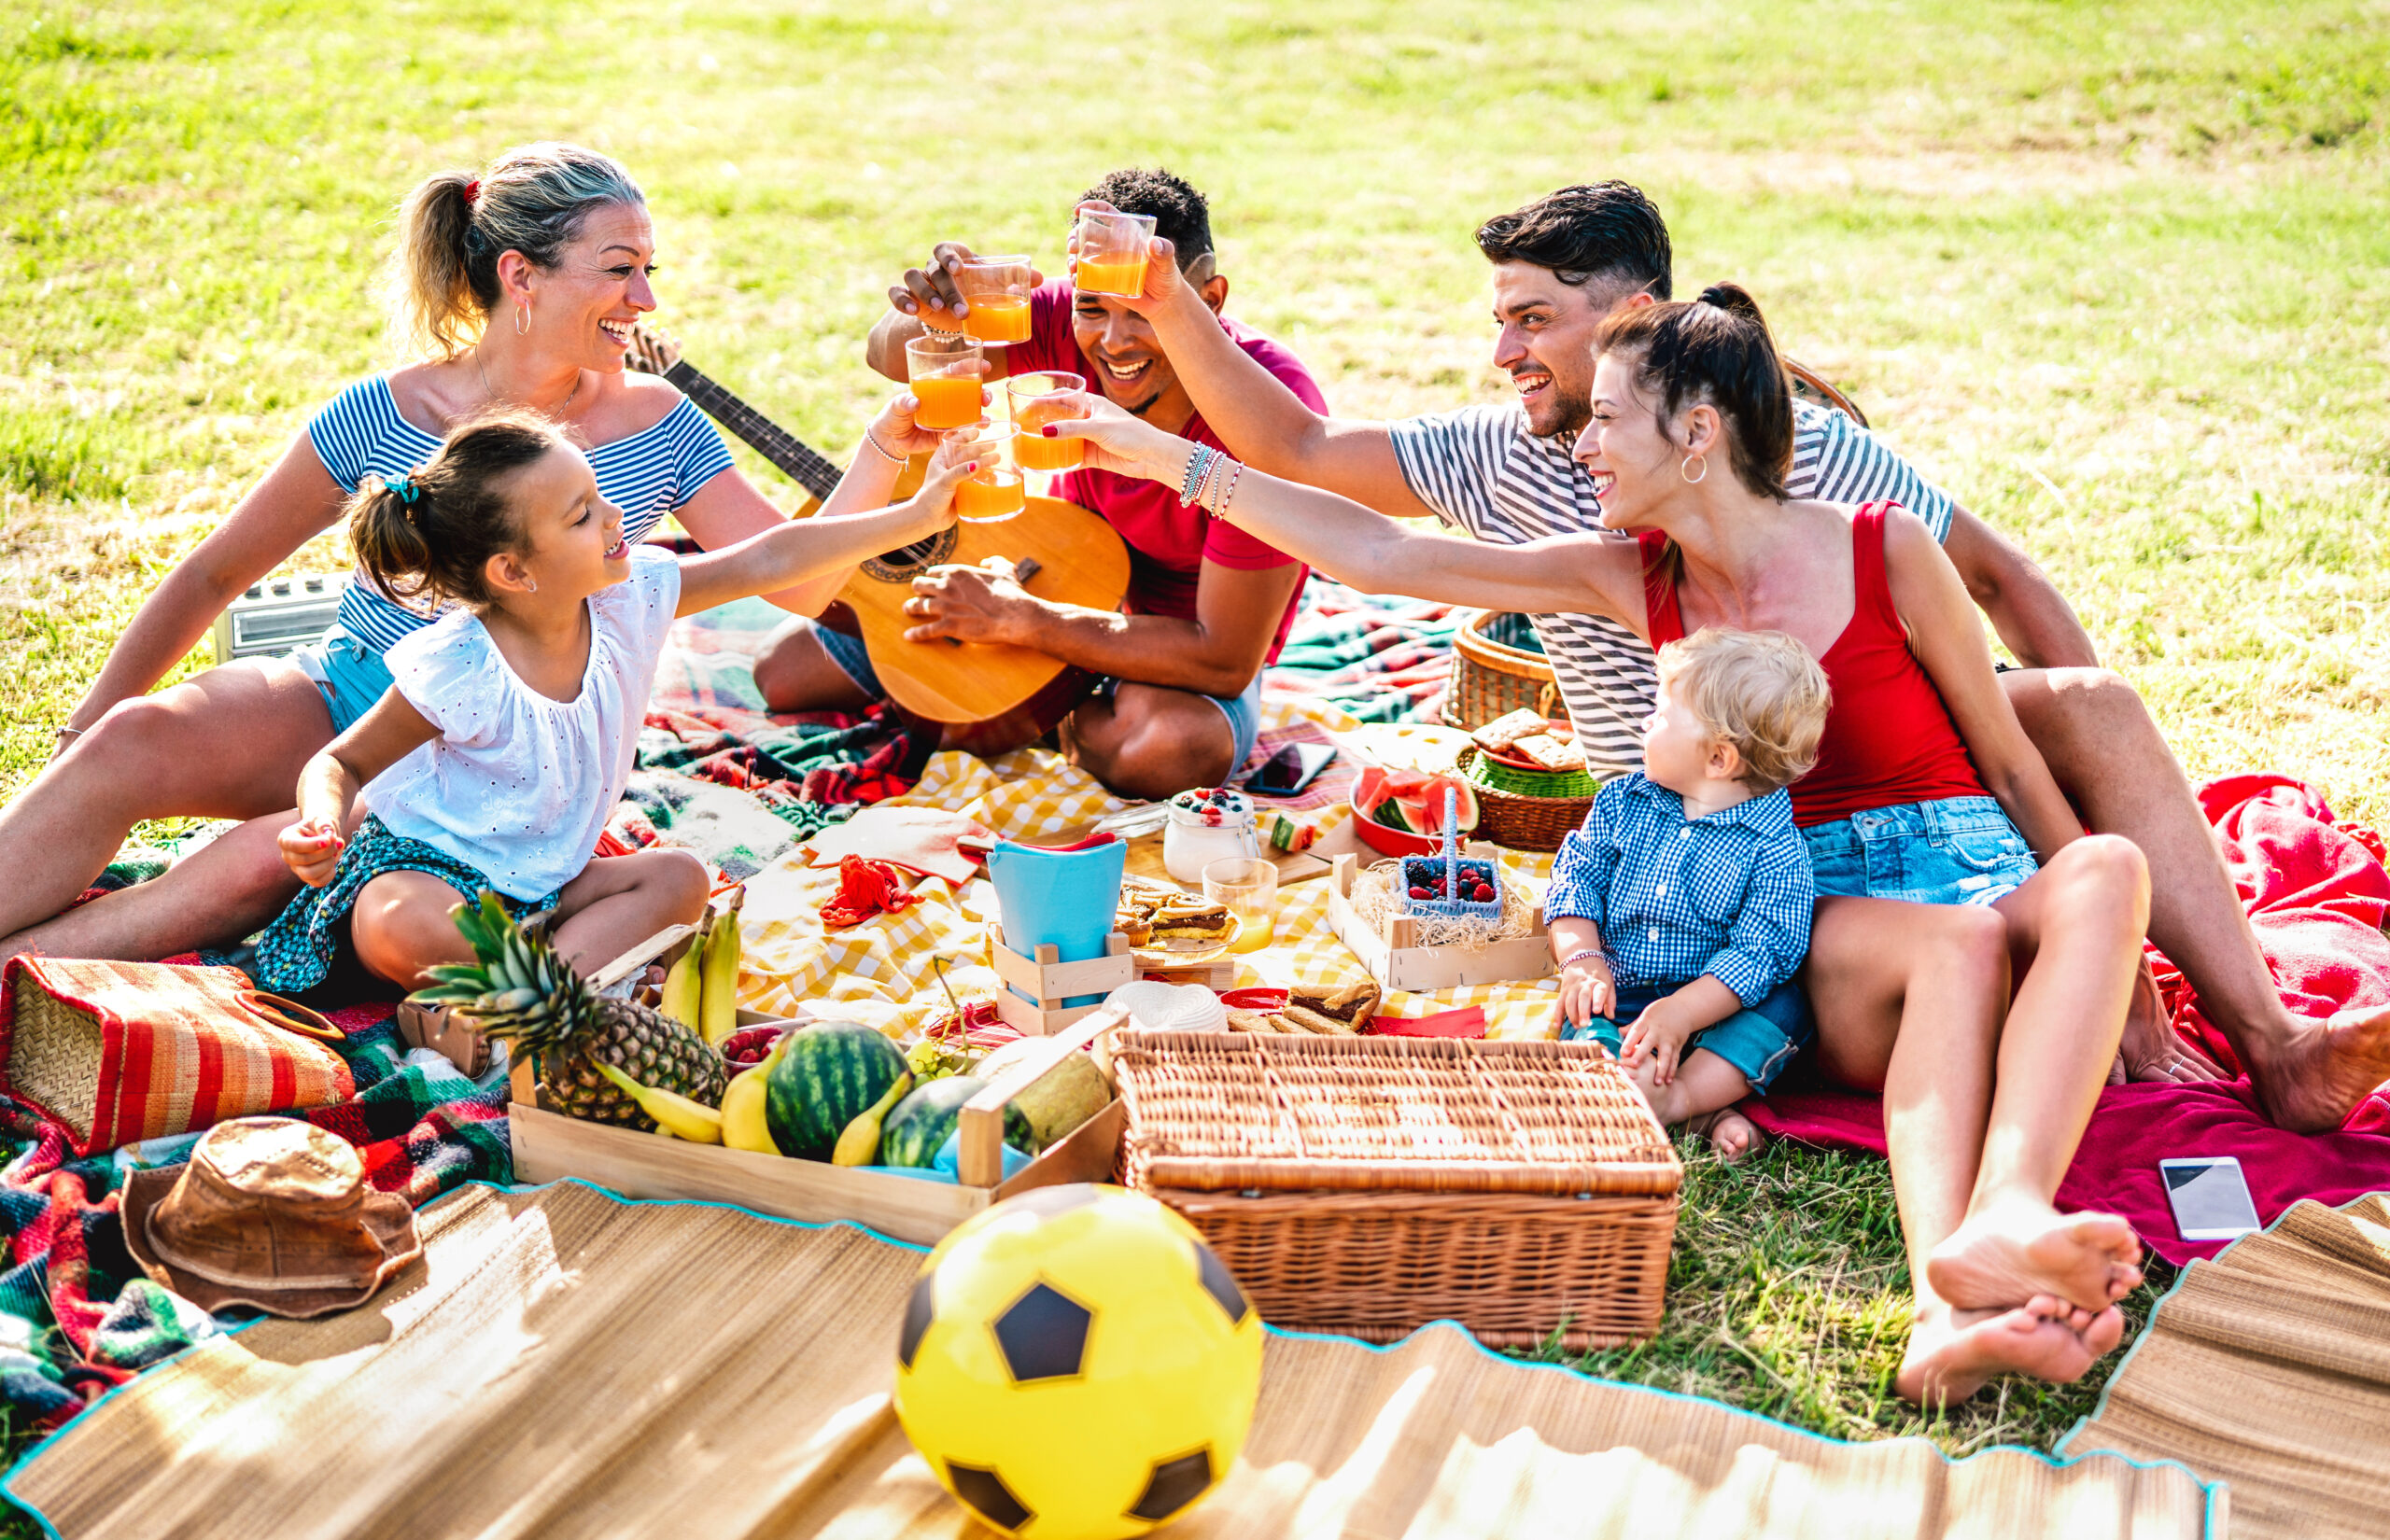 Families having fun together with kids at pic nic barbecue party - Joy and love life style concept with mixed race people toasting juices with children at park